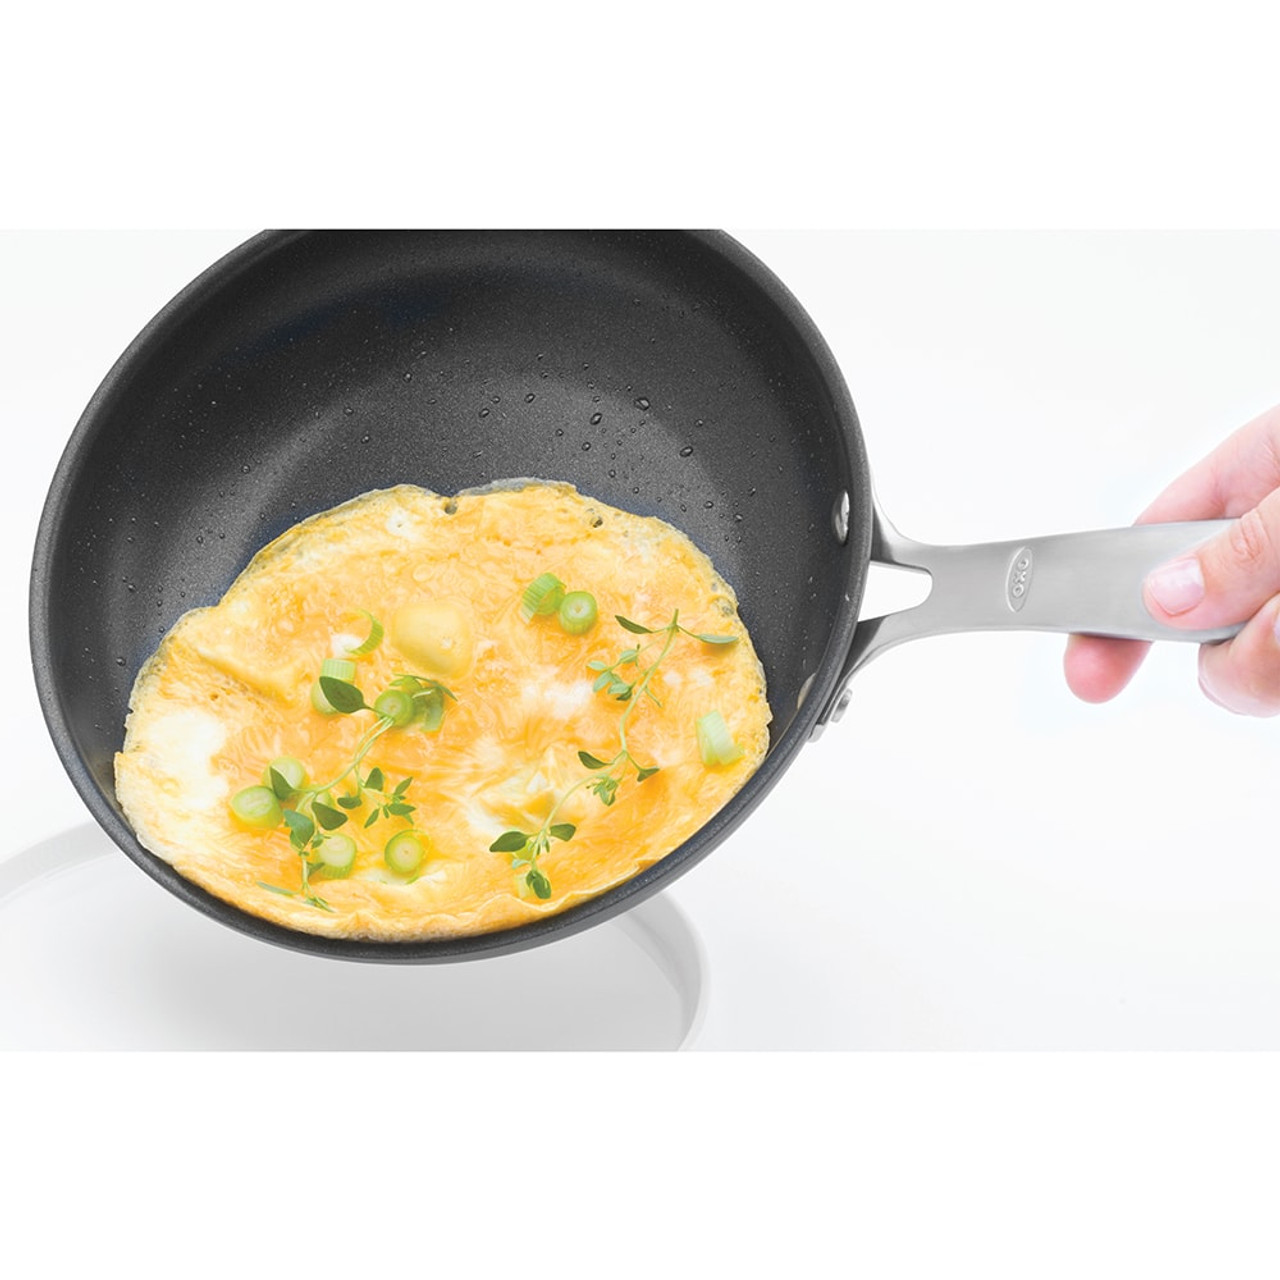 https://cdn11.bigcommerce.com/s-hccytny0od/images/stencil/1280x1280/products/362/3572/oxo-good-grips-nonstick-pro-open-fry-pan__27983.1596639521.jpg?c=2?imbypass=on